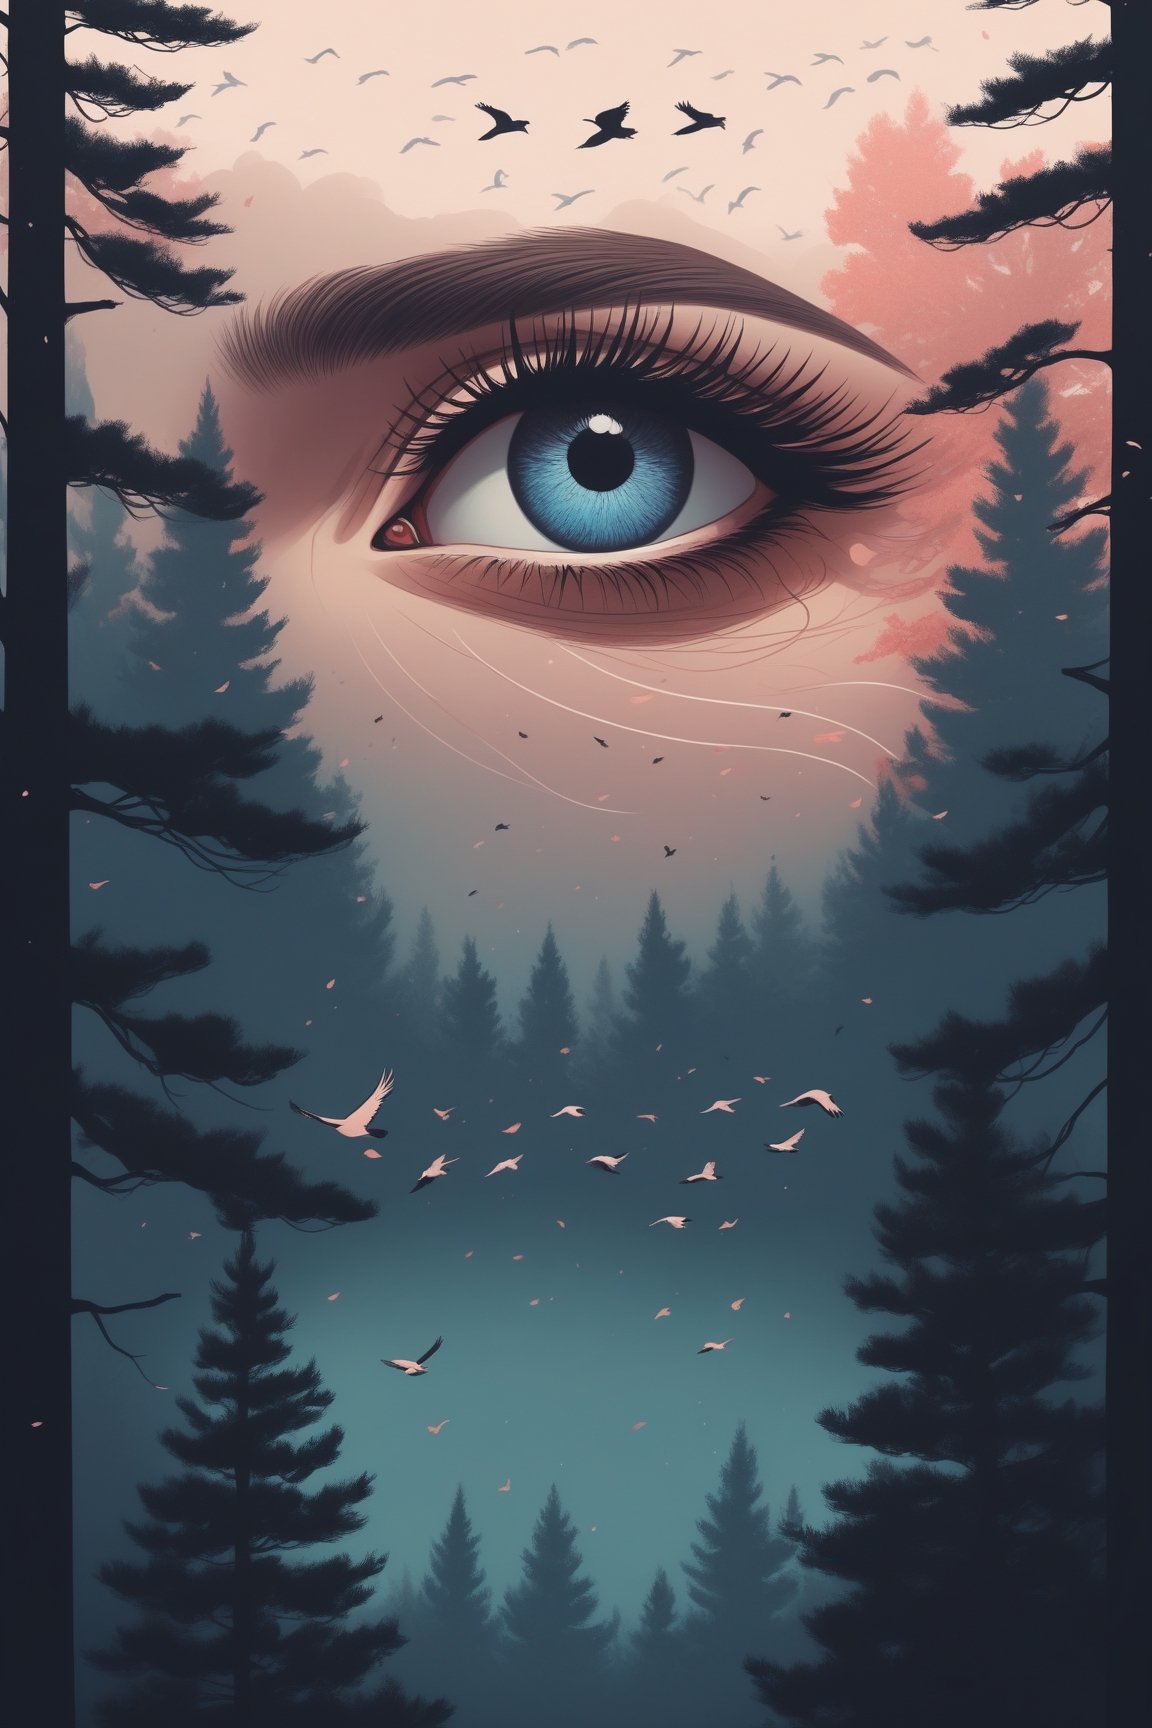 style of Alena Aenami, Illustrated poster, An intimate view of a woman's eye with (an entire universe in the pupil:0.8) – a place where (trees grow tall and birds take flight:1.3), all wrapped up in an elegant color palette.



